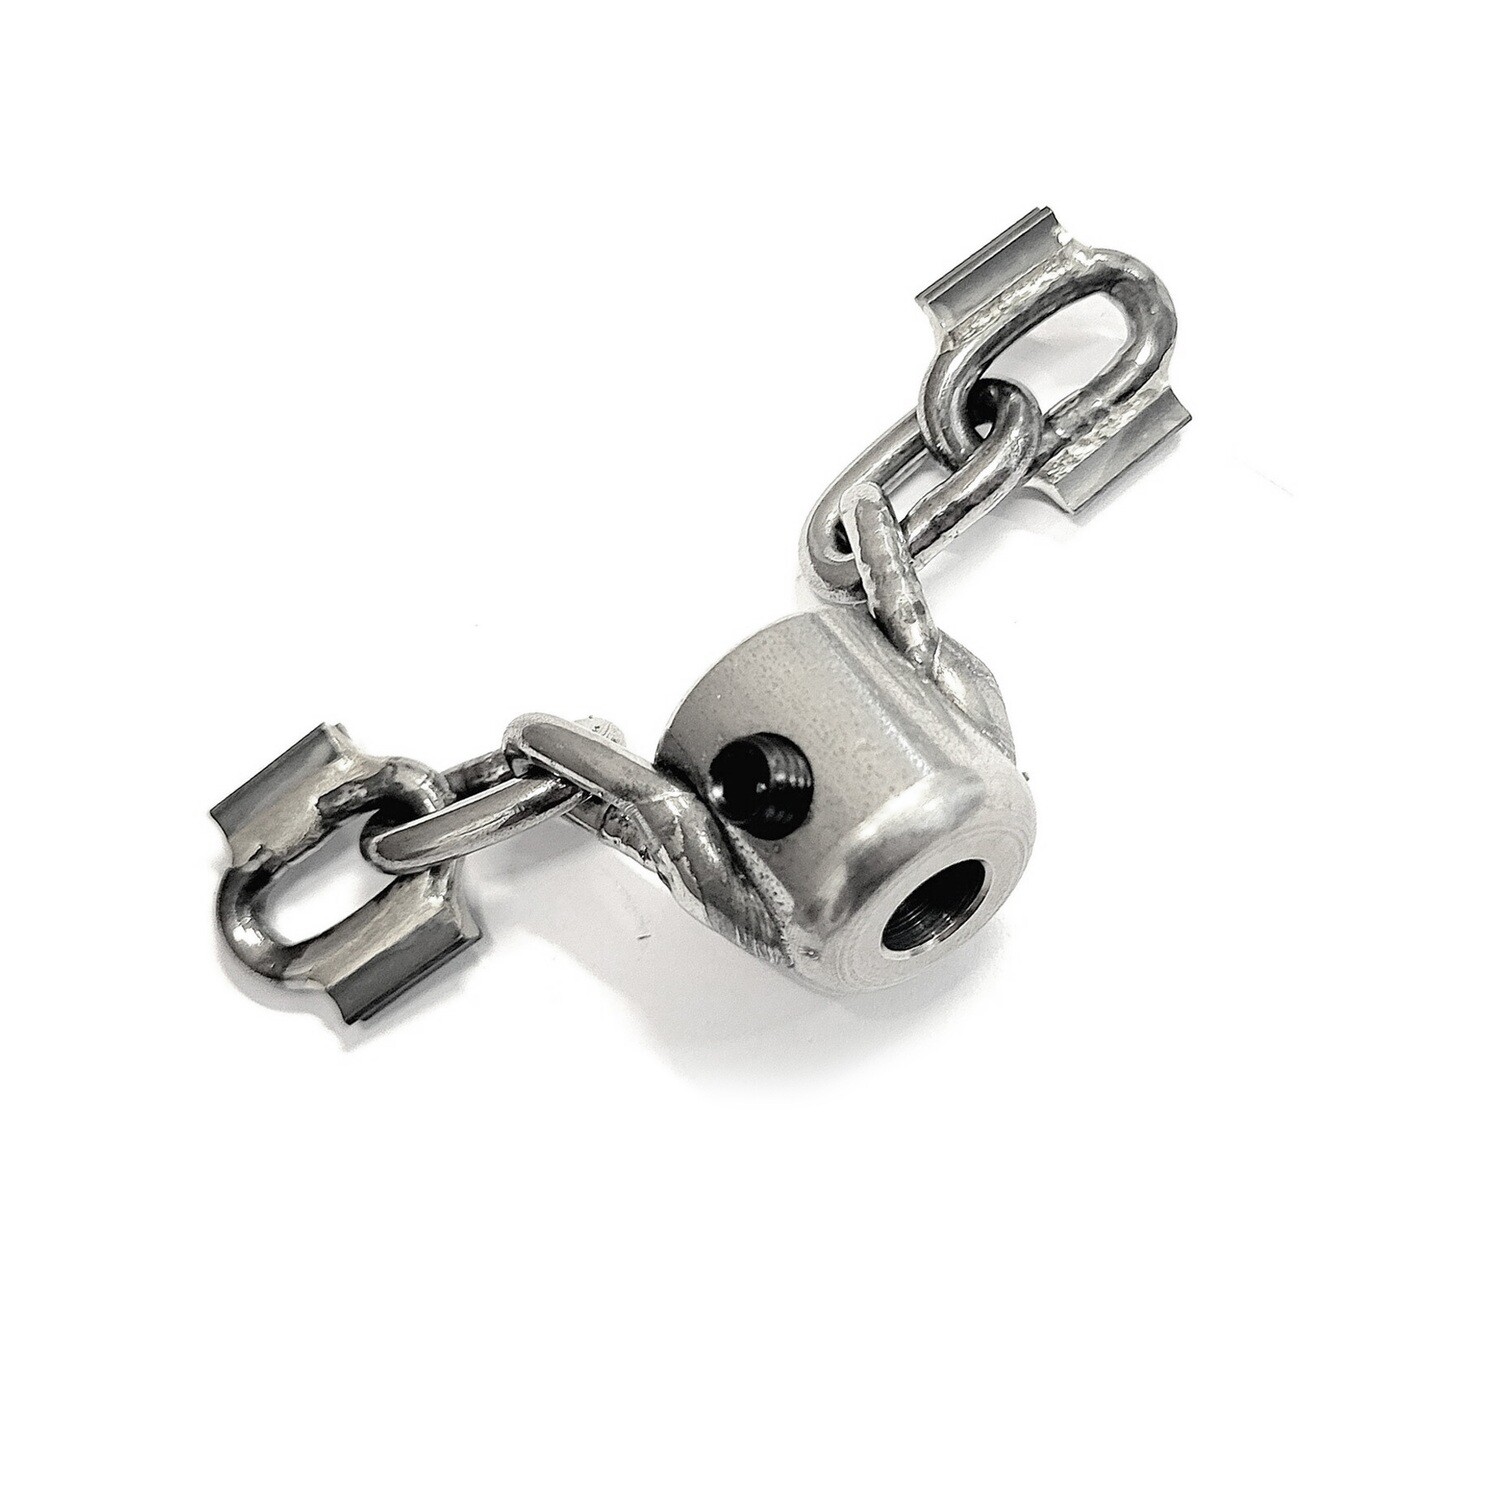 X-tip Mini Chain with hard metal bits (Cast Iron & Clay Pipes)